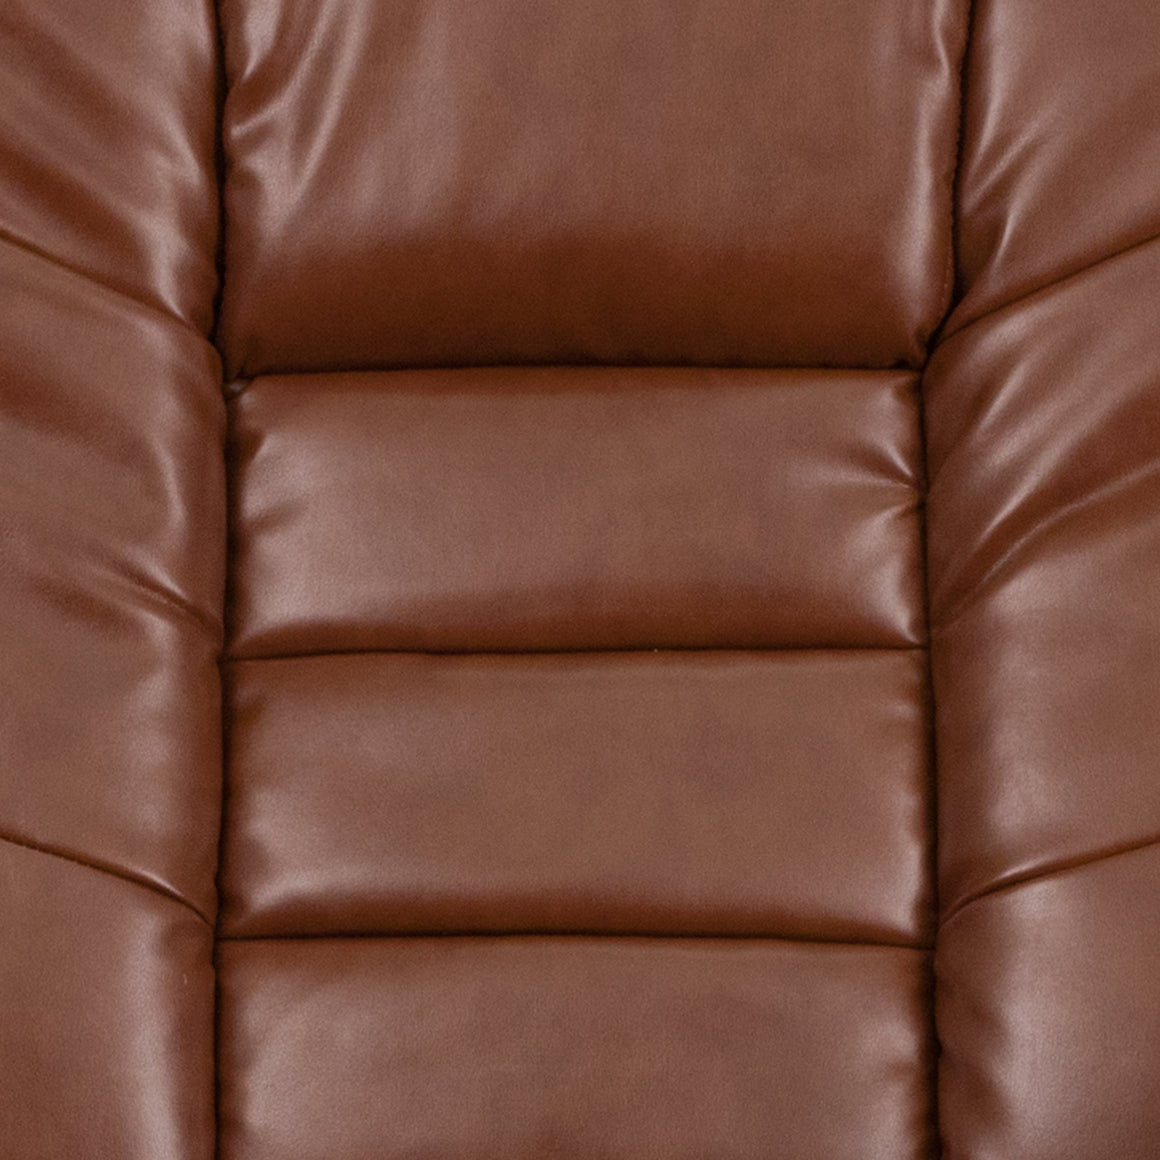 Brown Vintage Leather Recliner & Ottoman w/Swivel Wood Mahogany Base - Man Cave Boutique